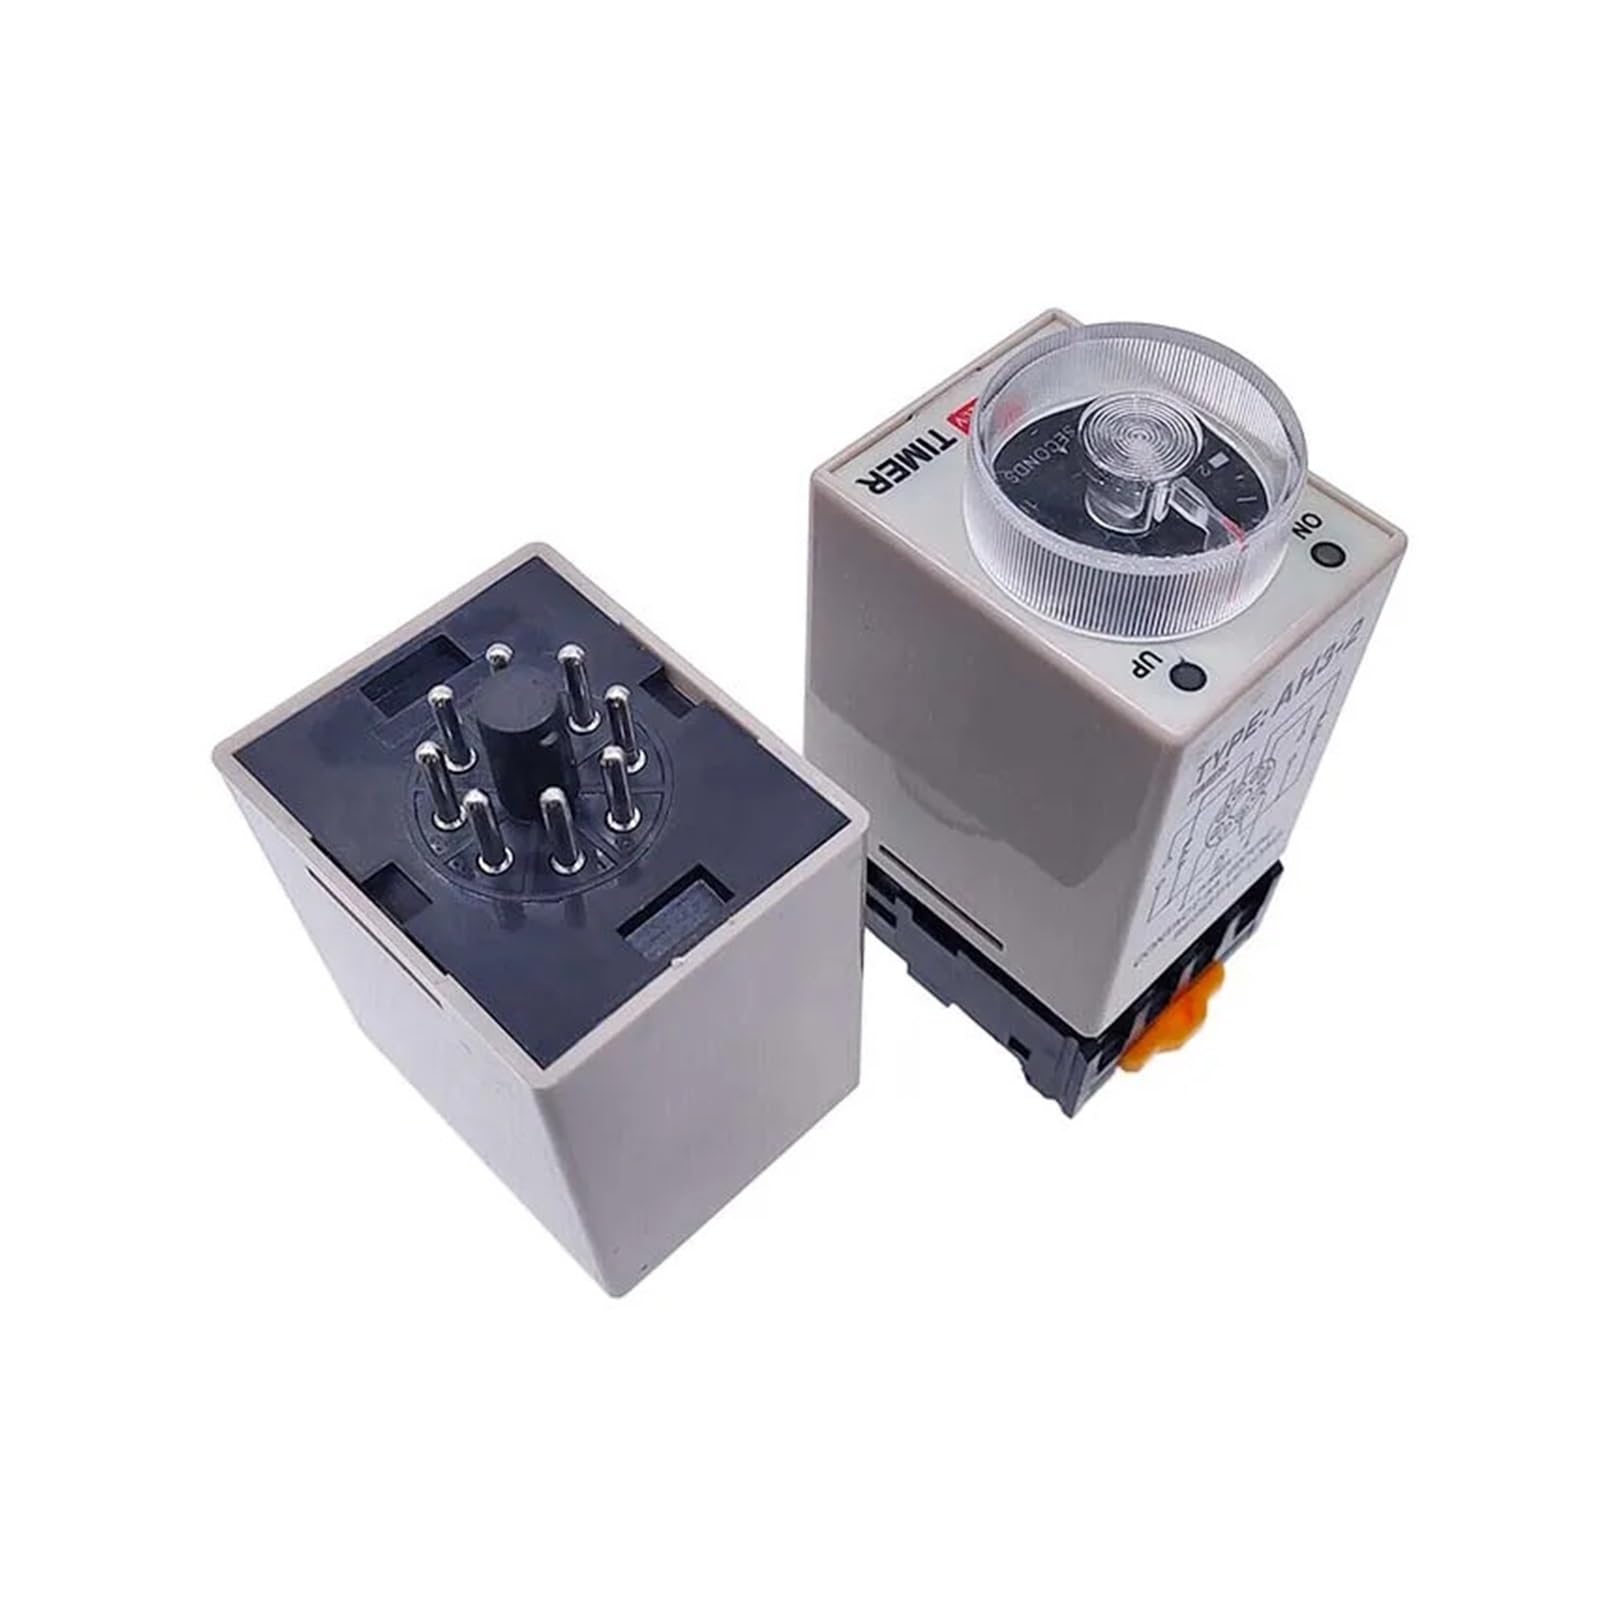 1 PC AH3-2 Power-on Delay Timer AH3-3 Time Relay AC Thick Stitch Time Set Range 1S/5S/10S/30S/60S/5M/10M/30M NWPNLXEA(AC220V,AH3-3 0-6Seconds) von NWPNLXEA